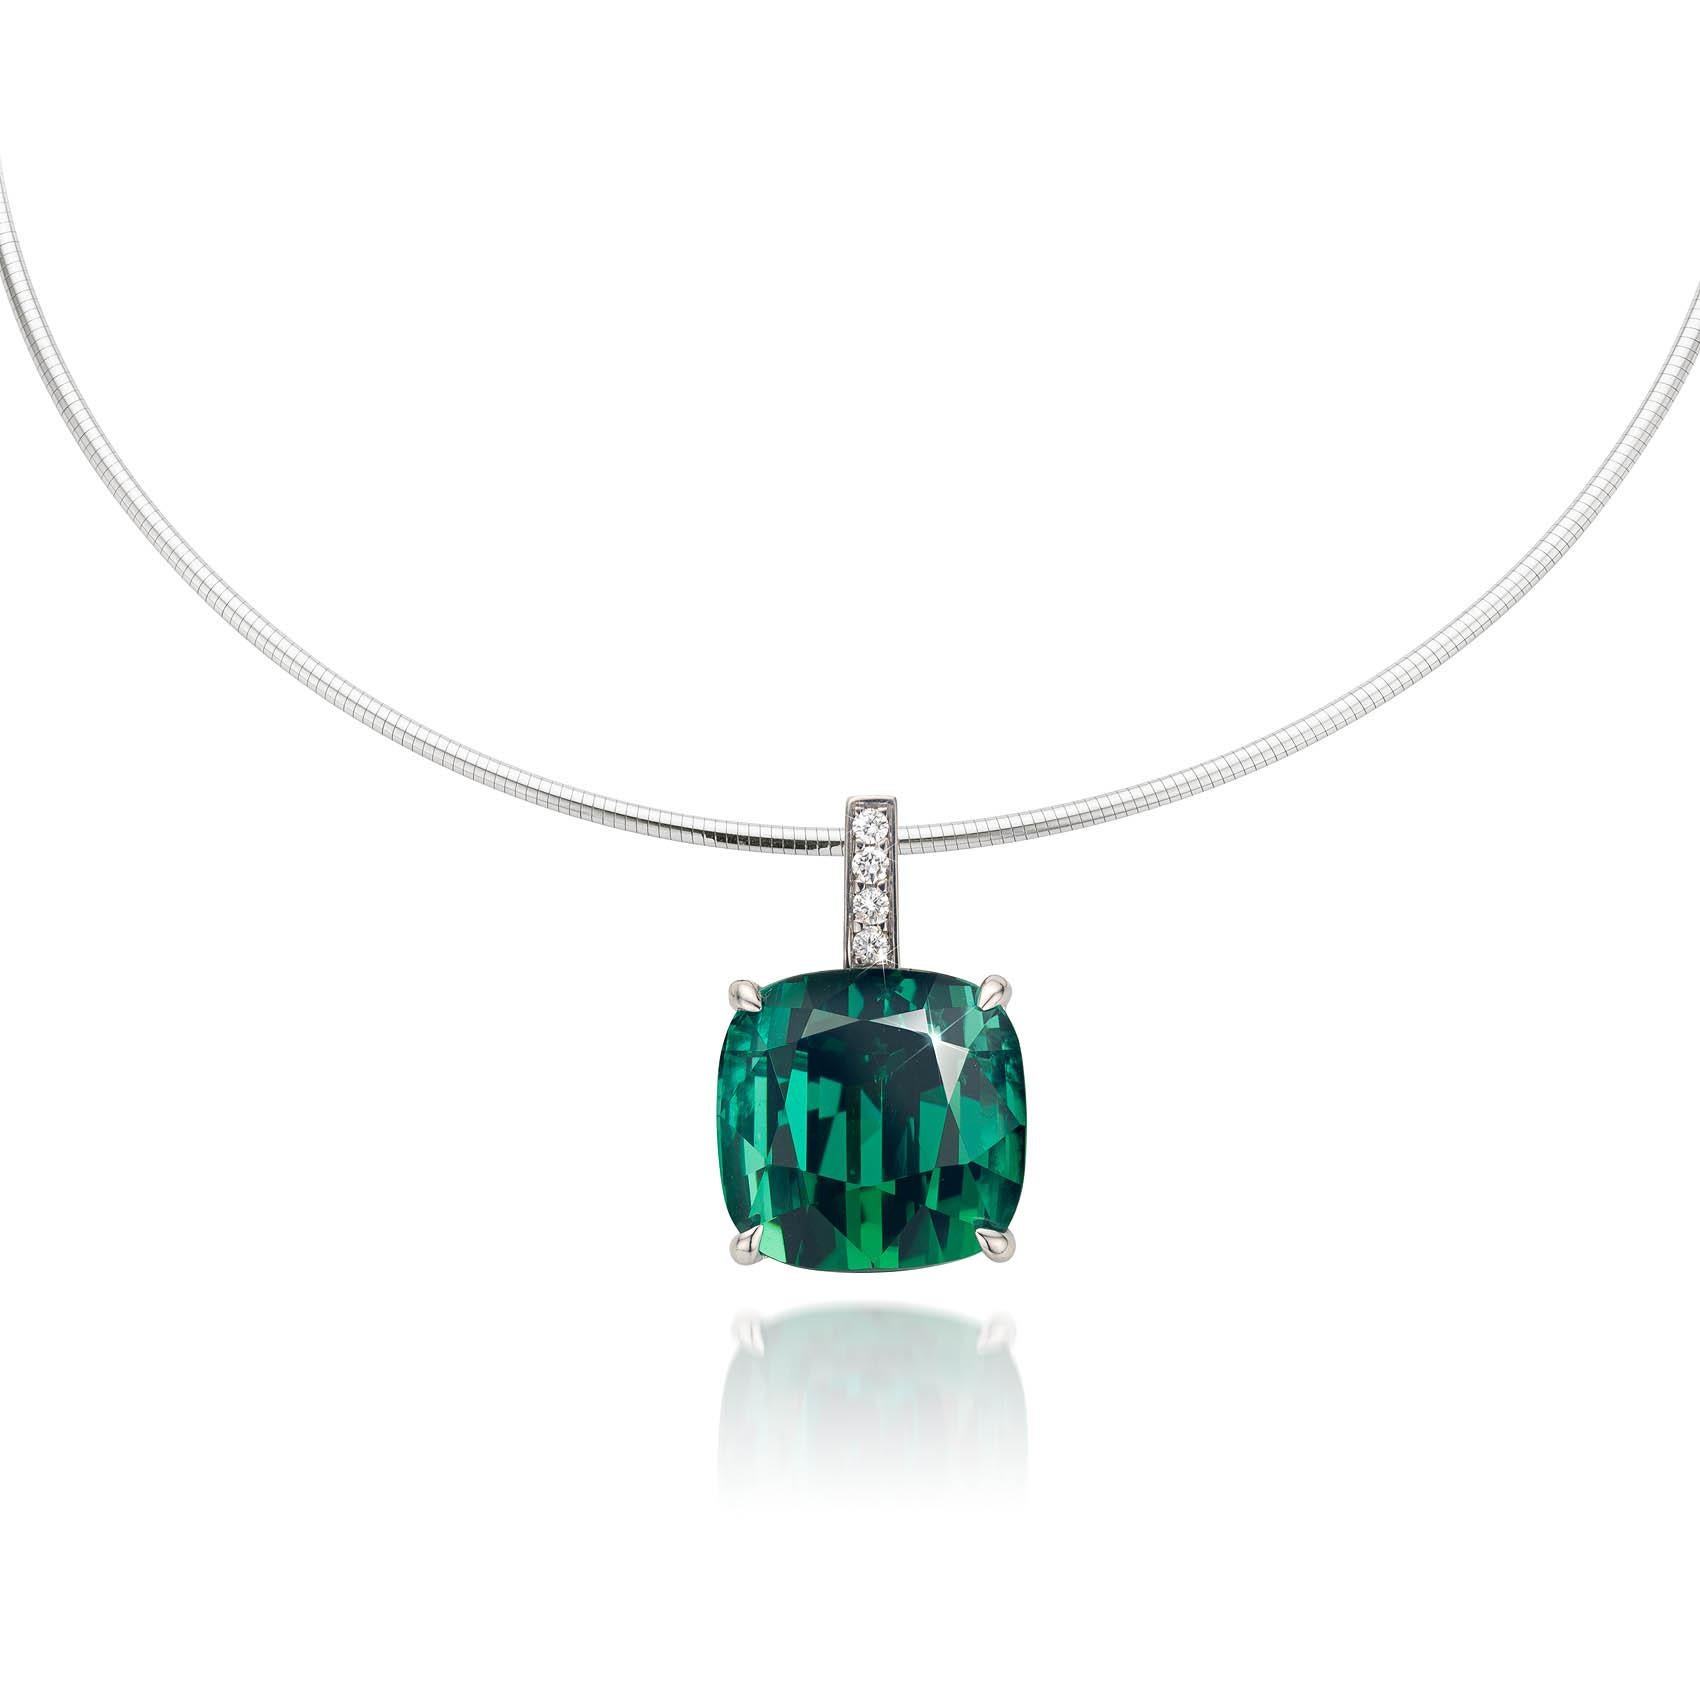 Contemporary Cober “Bright green” with a 9.40 Carat green Tourmaline and Diamonds Pendant For Sale